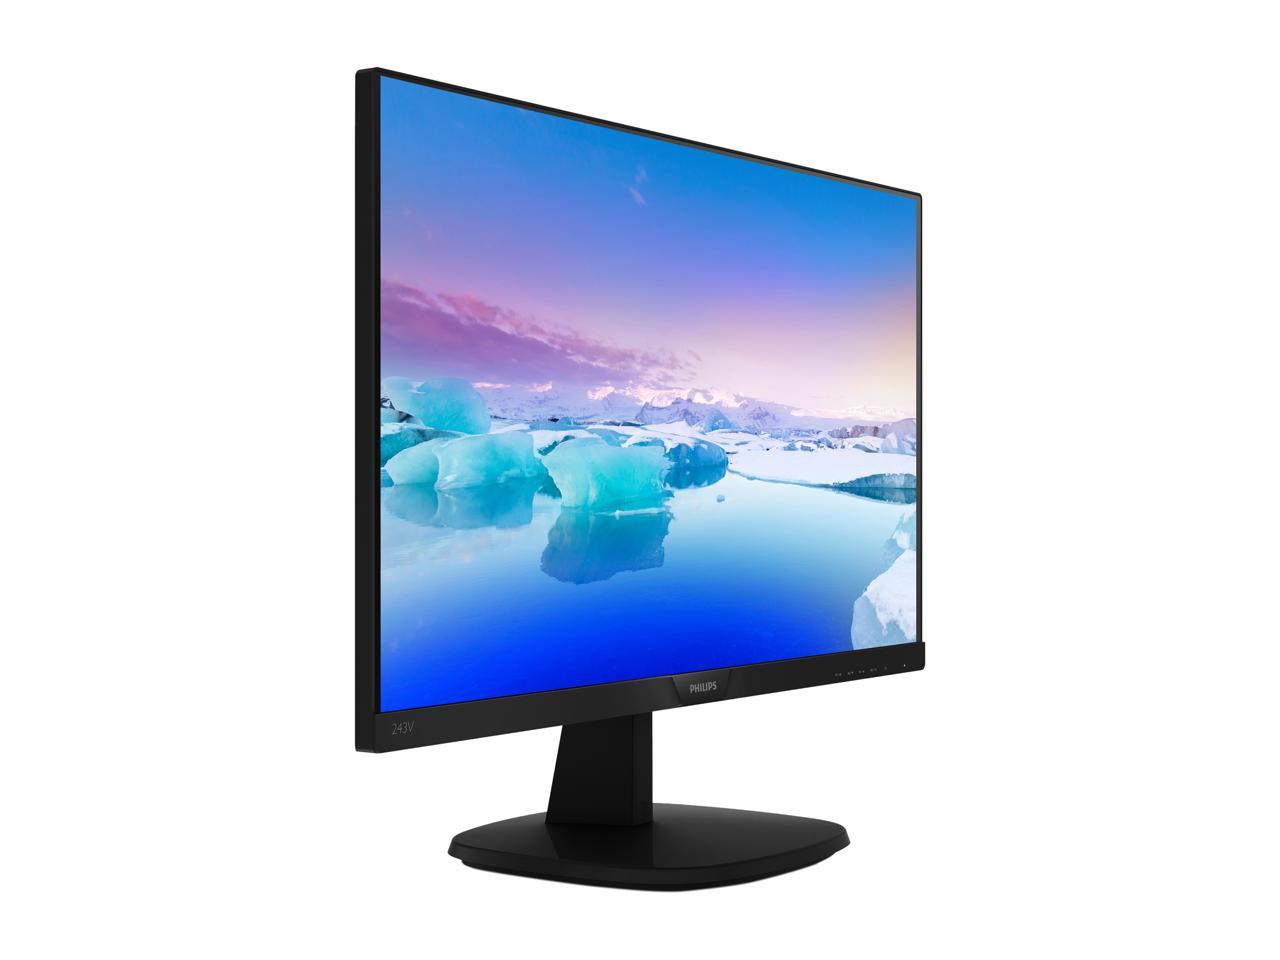 Philips 23.8" LCD Monitor with LED Backlight - image 5 of 8